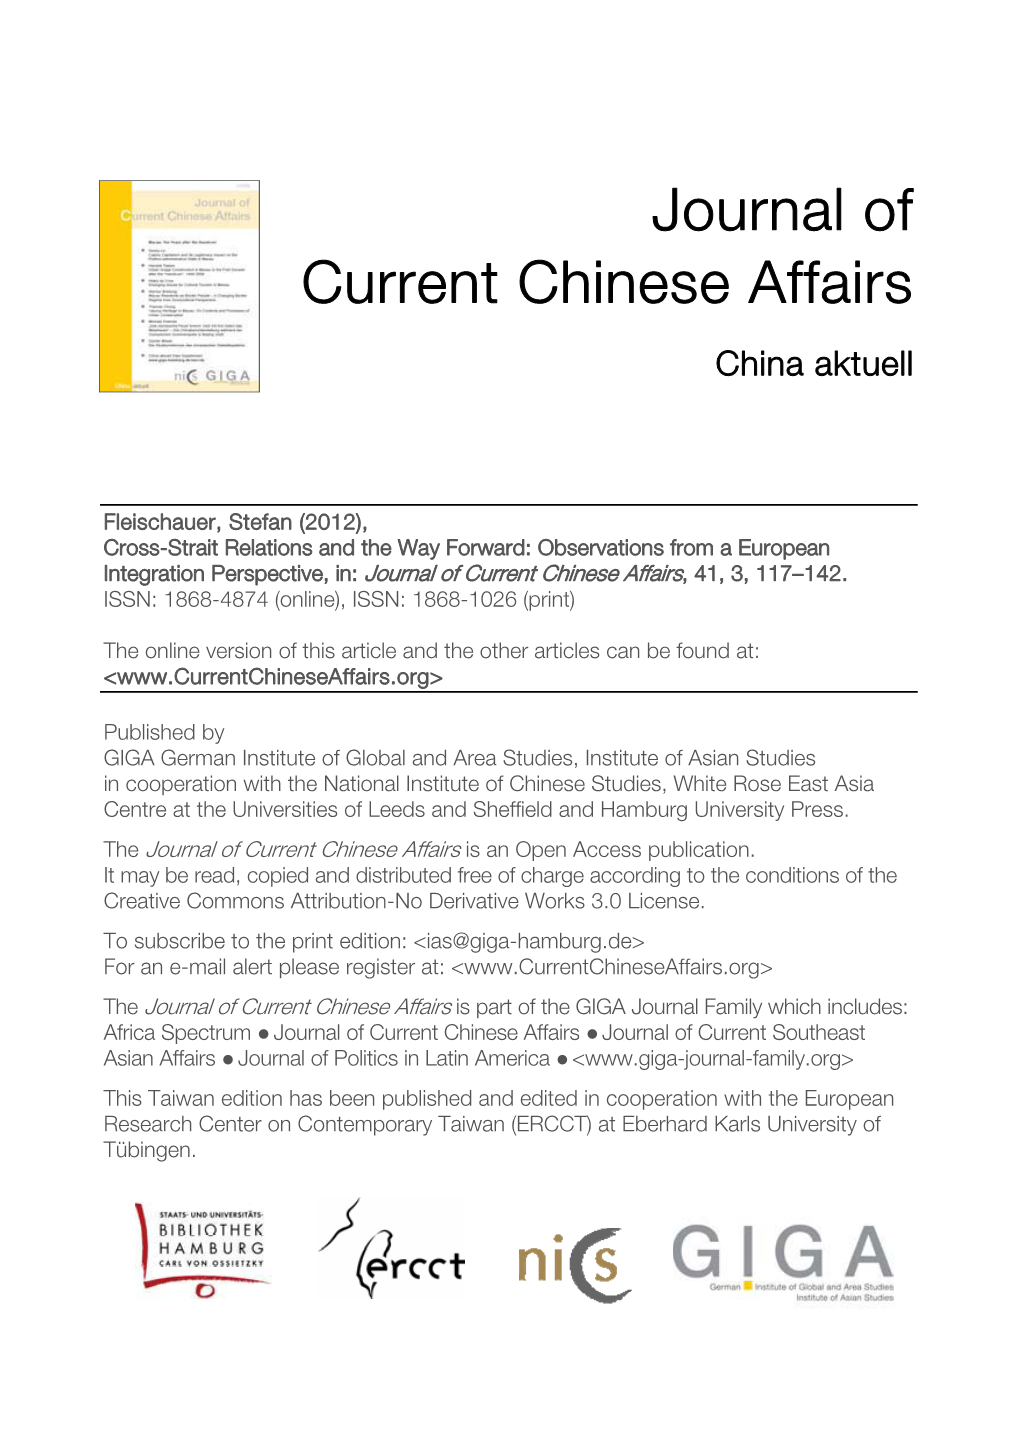 Cross-Strait Relations and the Way Forward: Observations from a European Integration Perspective, In: Journal of Current Chinese Affairs, 41, 3, 117–142